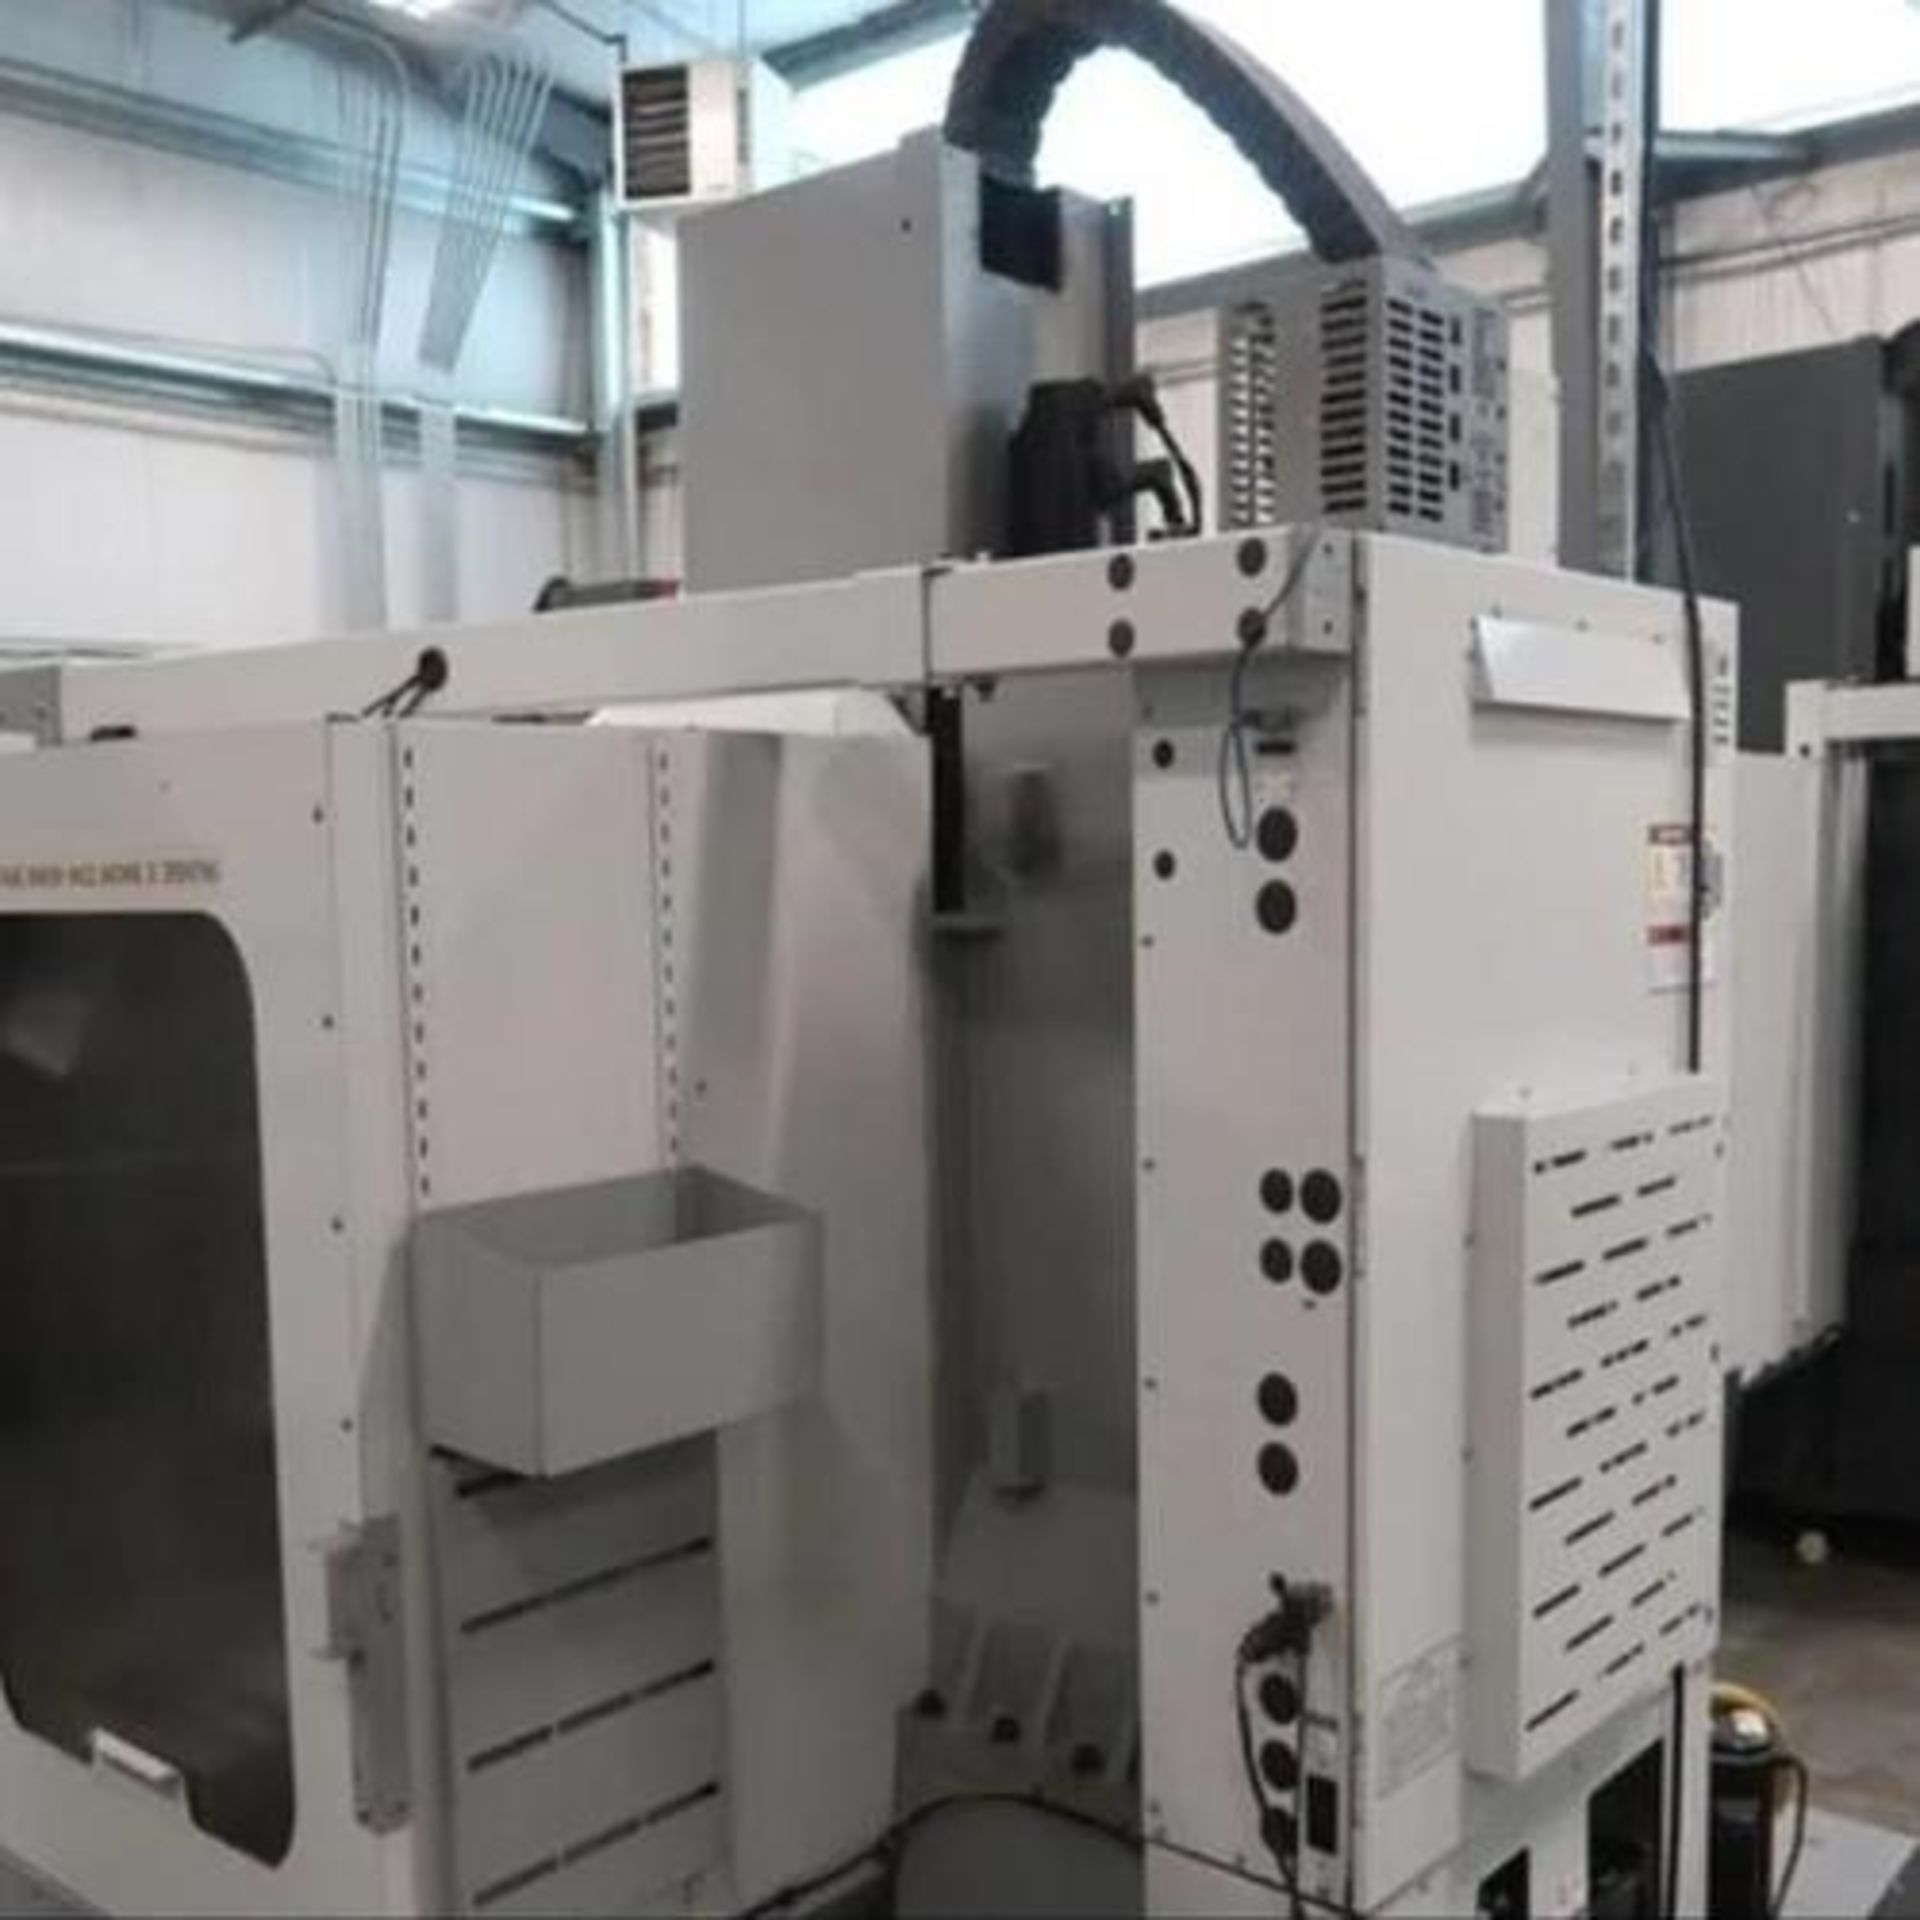 2007 HAAS VF-2 CNC Vertical Machining Center - Image 11 of 14